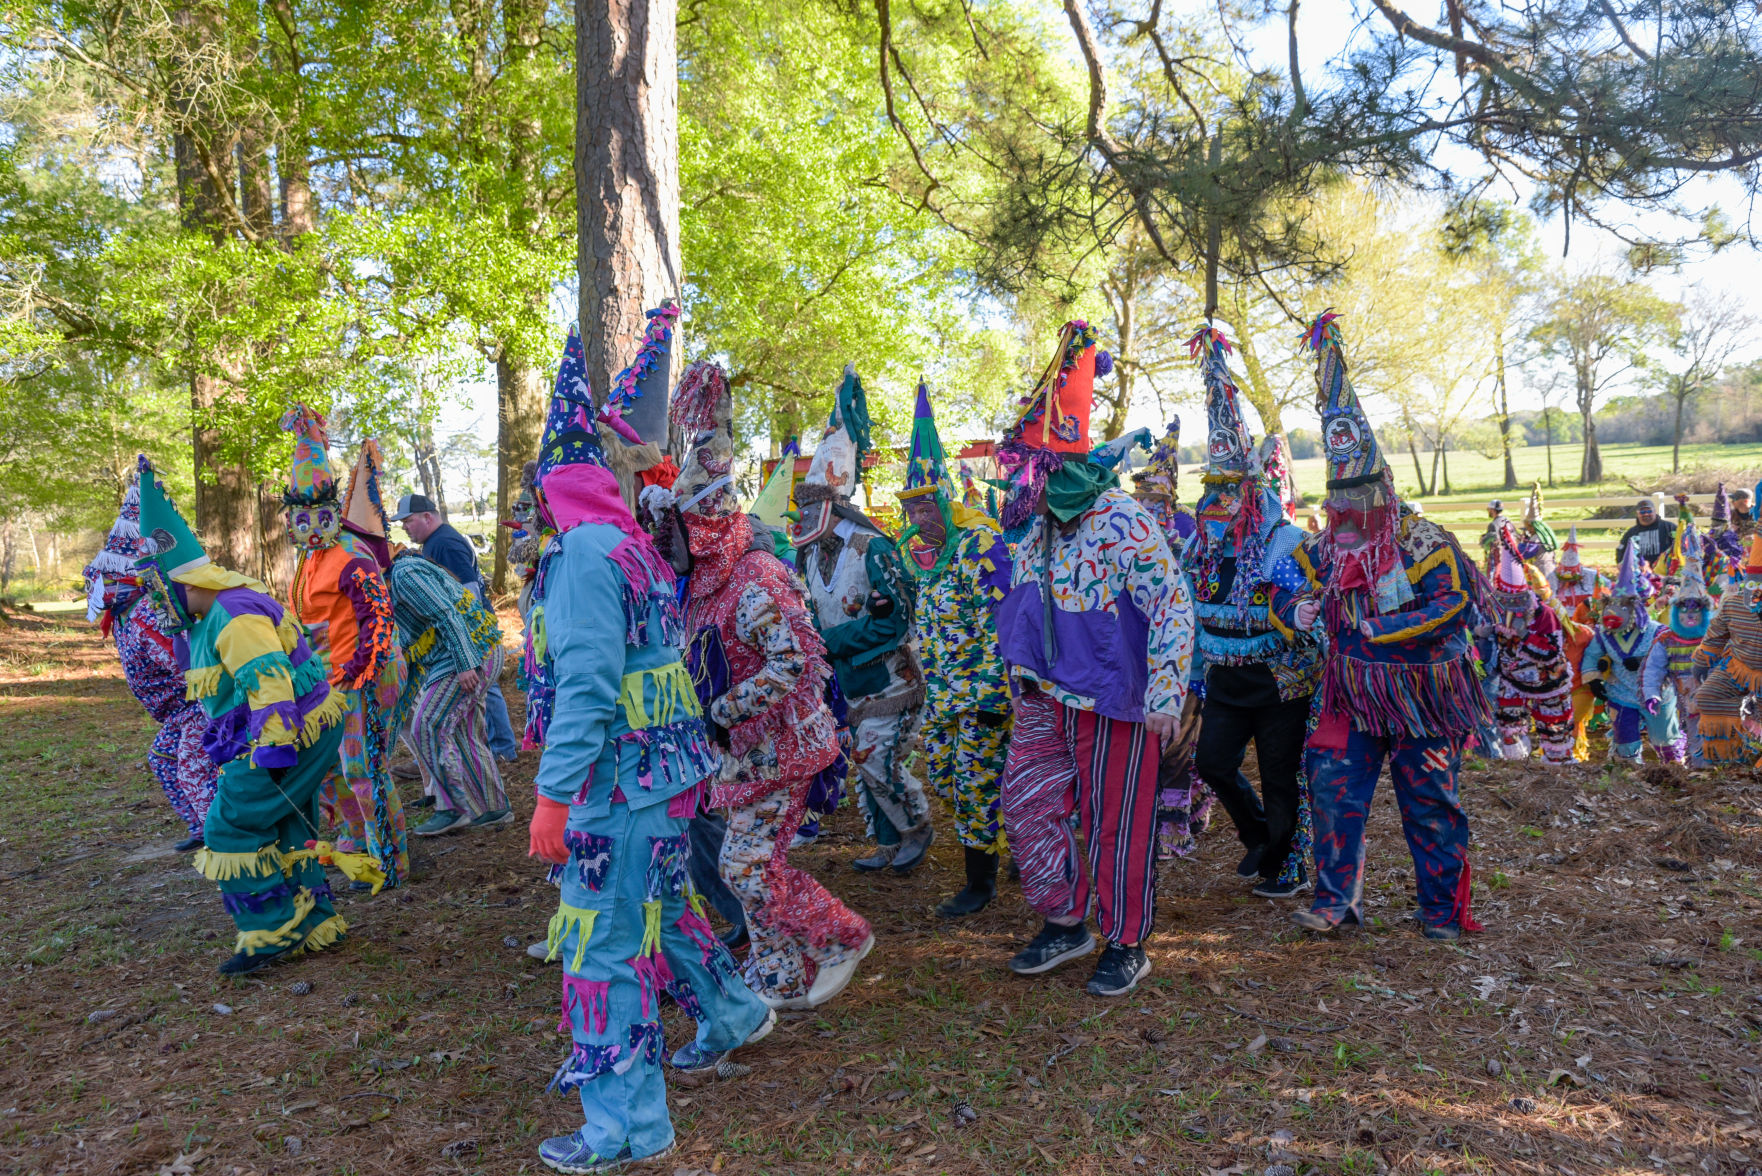 Chicken chasing and deep play rural Mardi Gras Entertainment/Life theadvocate